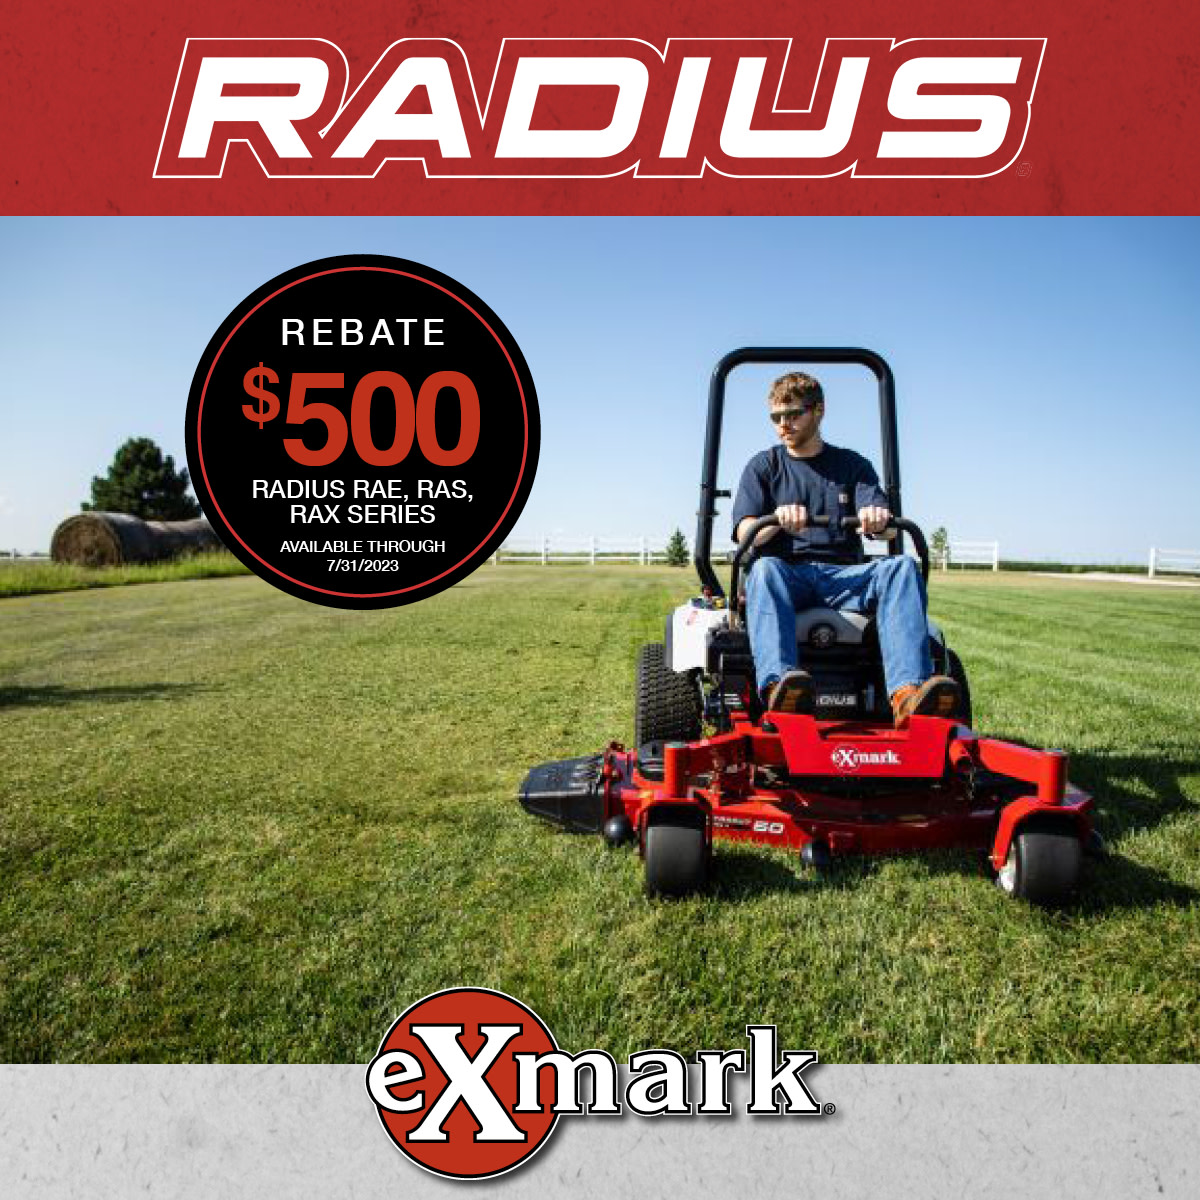 ⏱💸 The countdown for savings with @Exmarkmowers' #rebate offer on select Radius models is on!

Get to #AdvancedMower in #BessemerAL and ask which Radius models the $500 rebate applies to now through July 31st! ☀📅